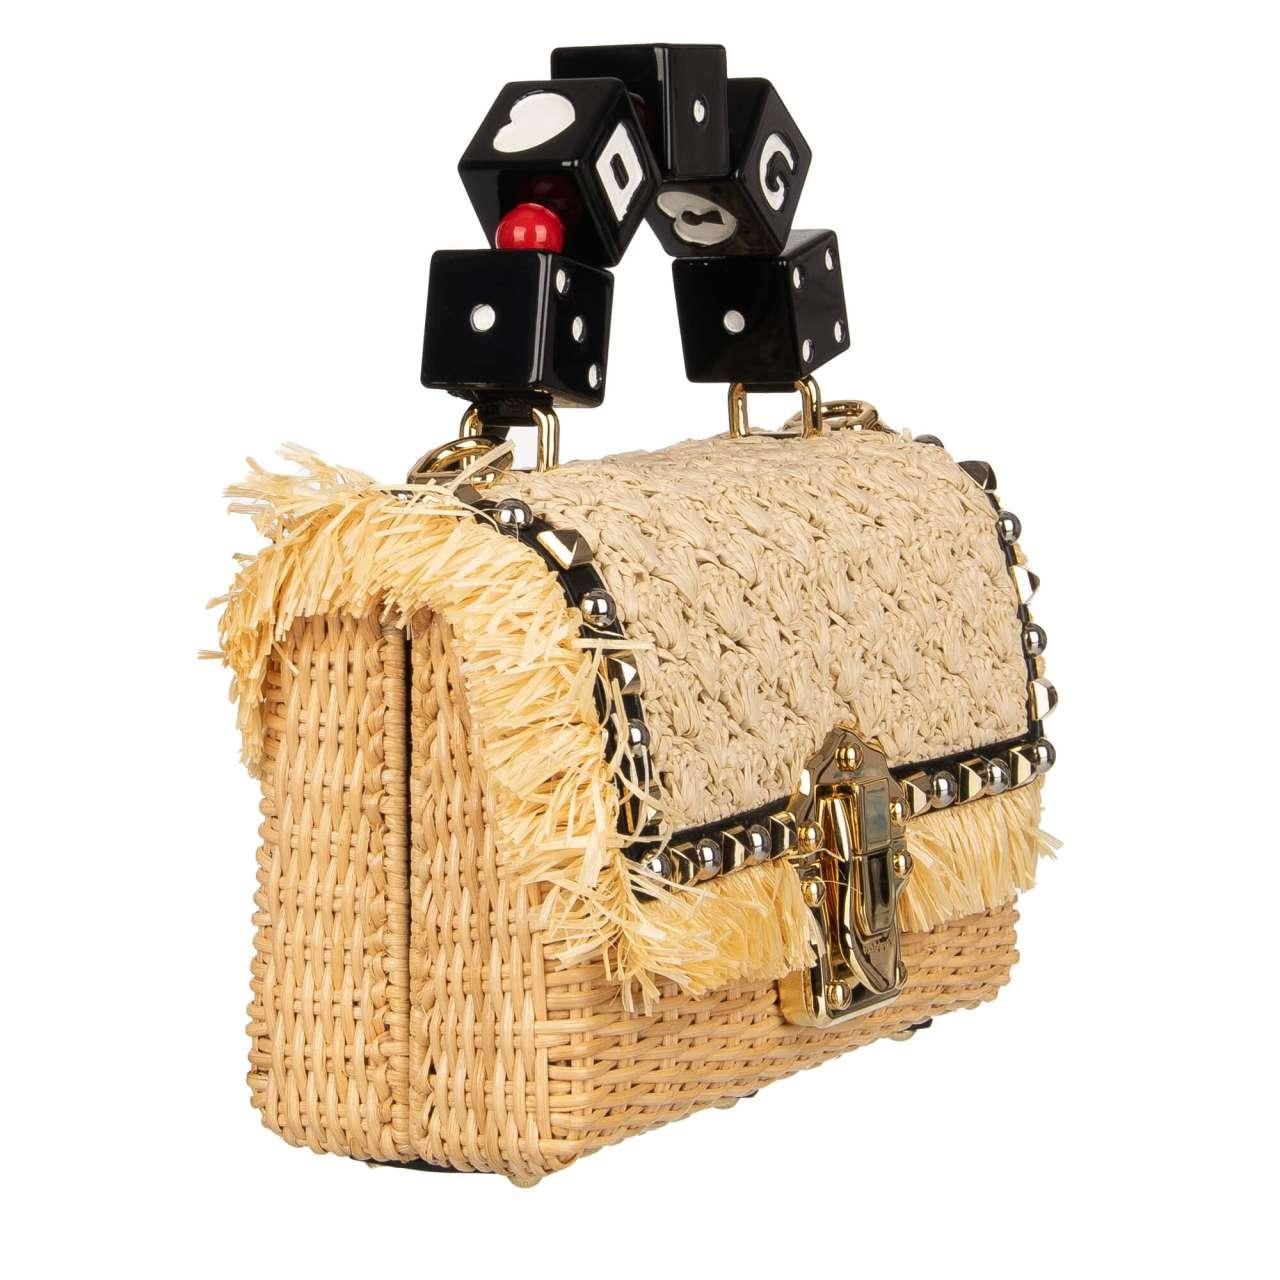 - Raffia Straw shoulder bag / handbag LUCIA with Dices handle, studs and massive gold chain strap by DOLCE & GABBANA - New without Tag; with Dustbag, Authenticity Card - Former RRP: EUR 3.500 - MADE IN ITALY - Material: 90% Straw, 10% Lambskin -